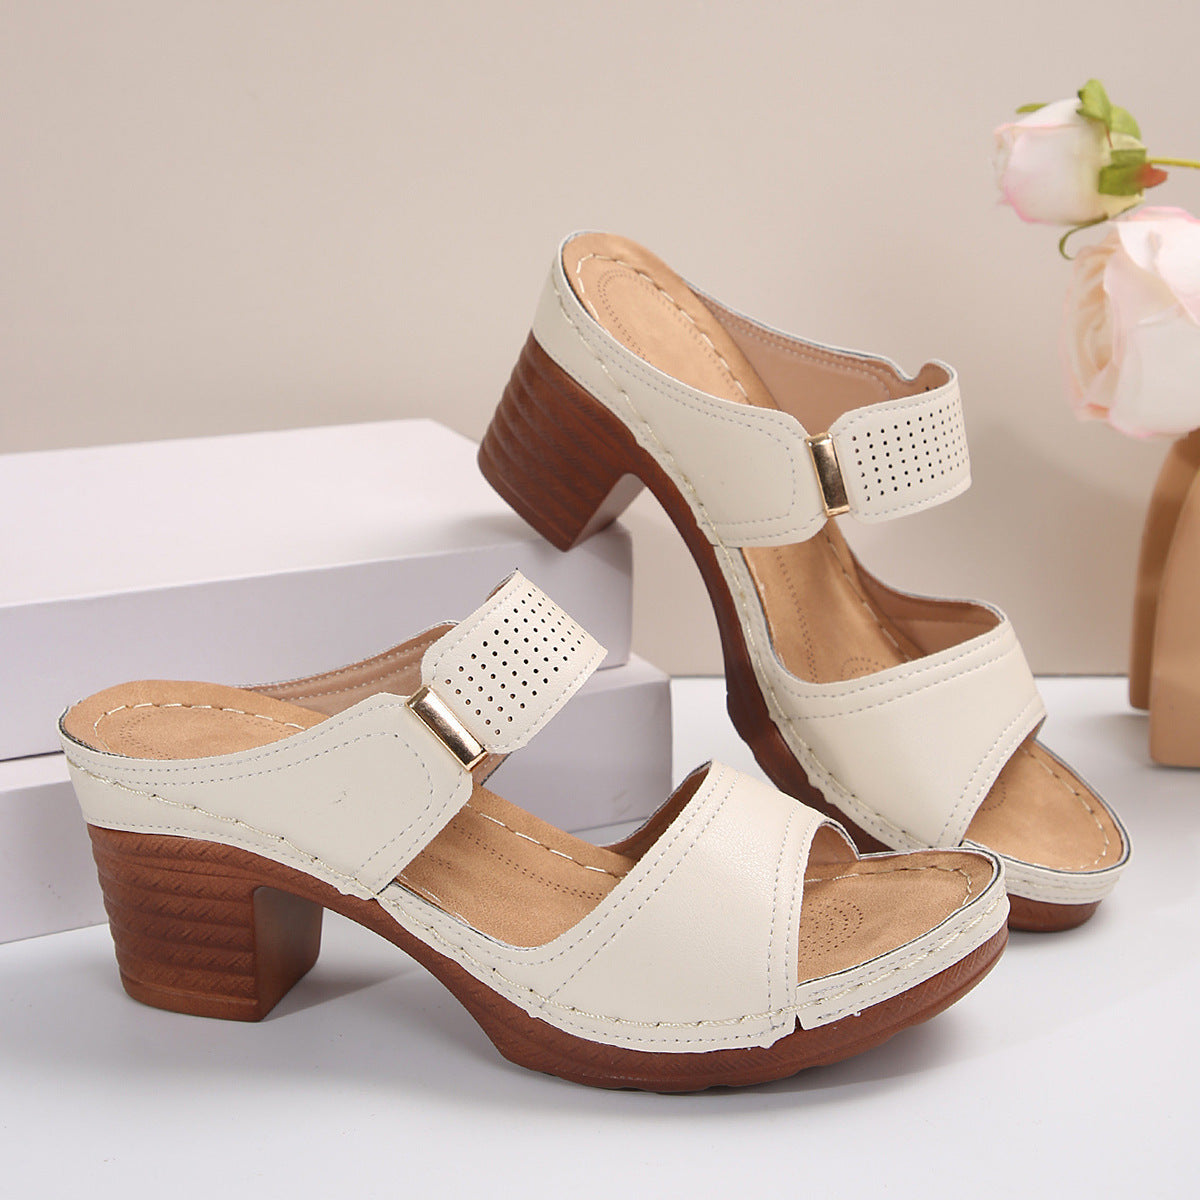 Women's Casual Anti Slip Thick Soled High Heel Sandals